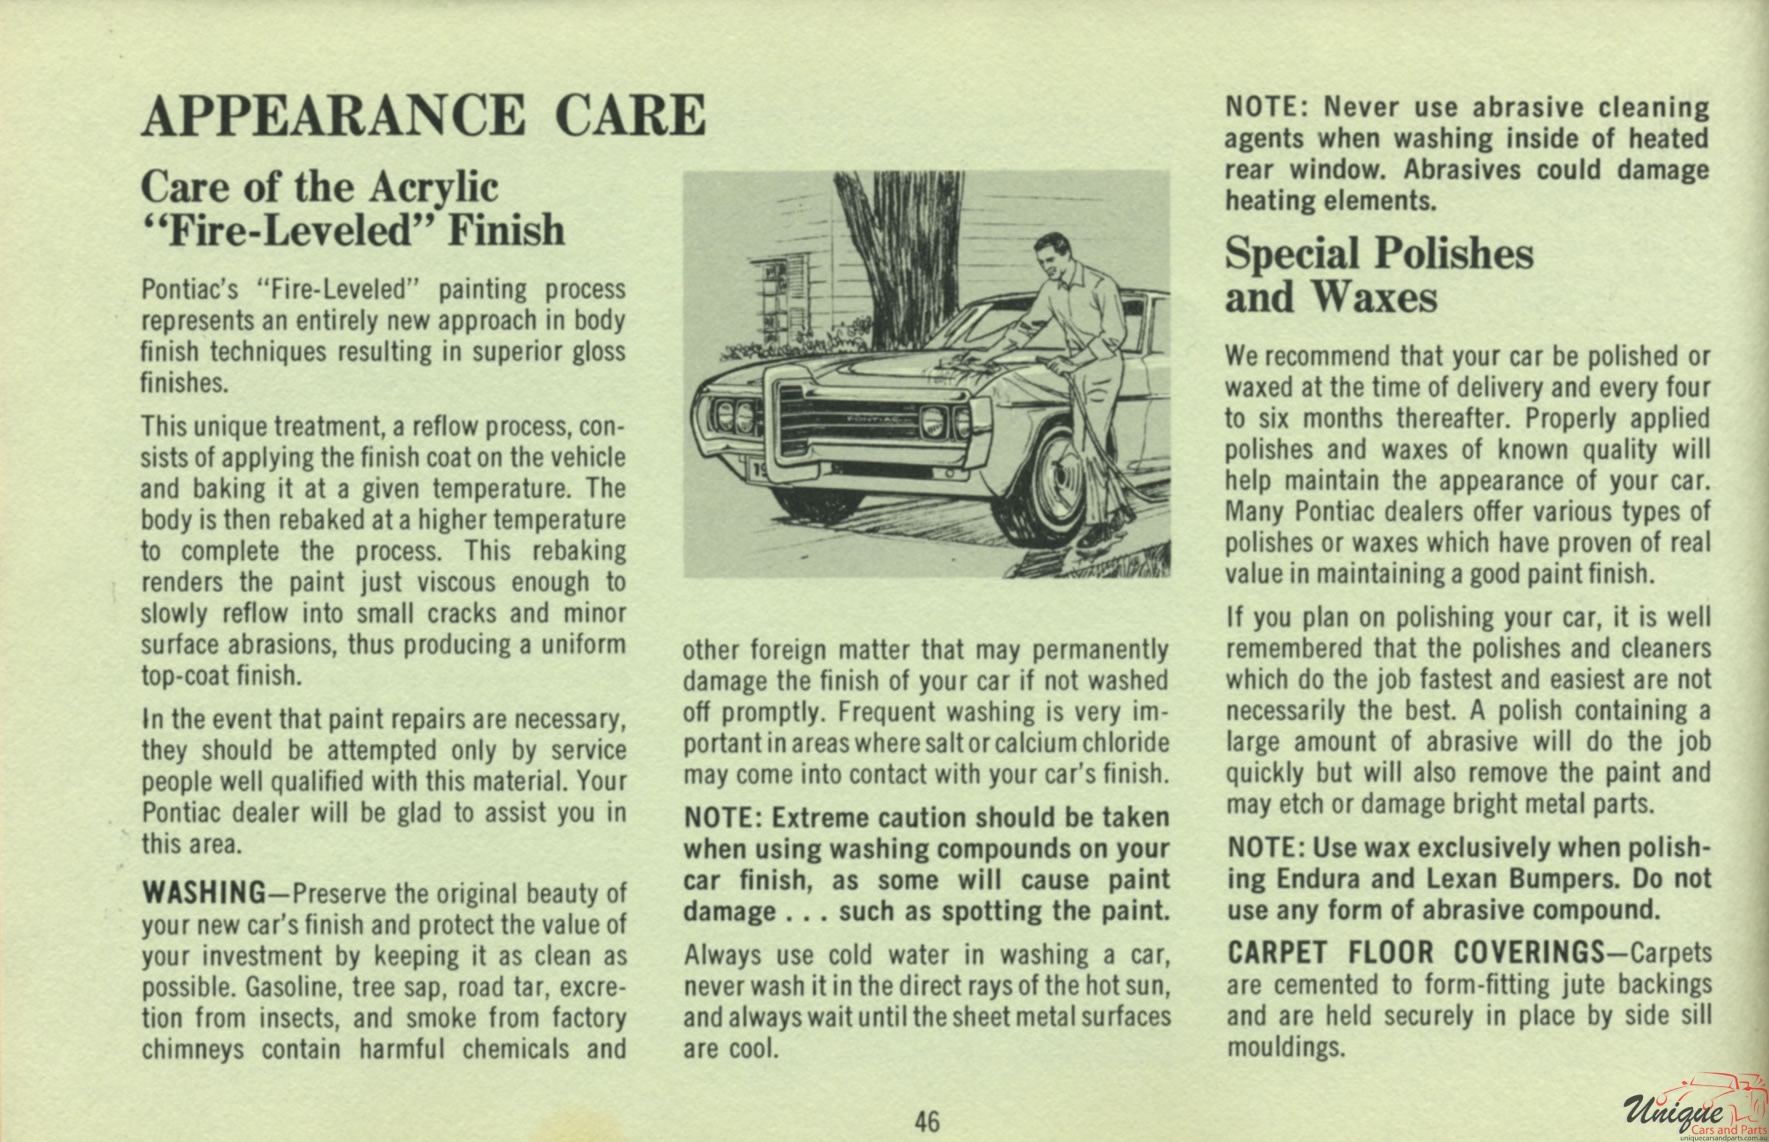 1969 Pontiac Owners Manual Page 6